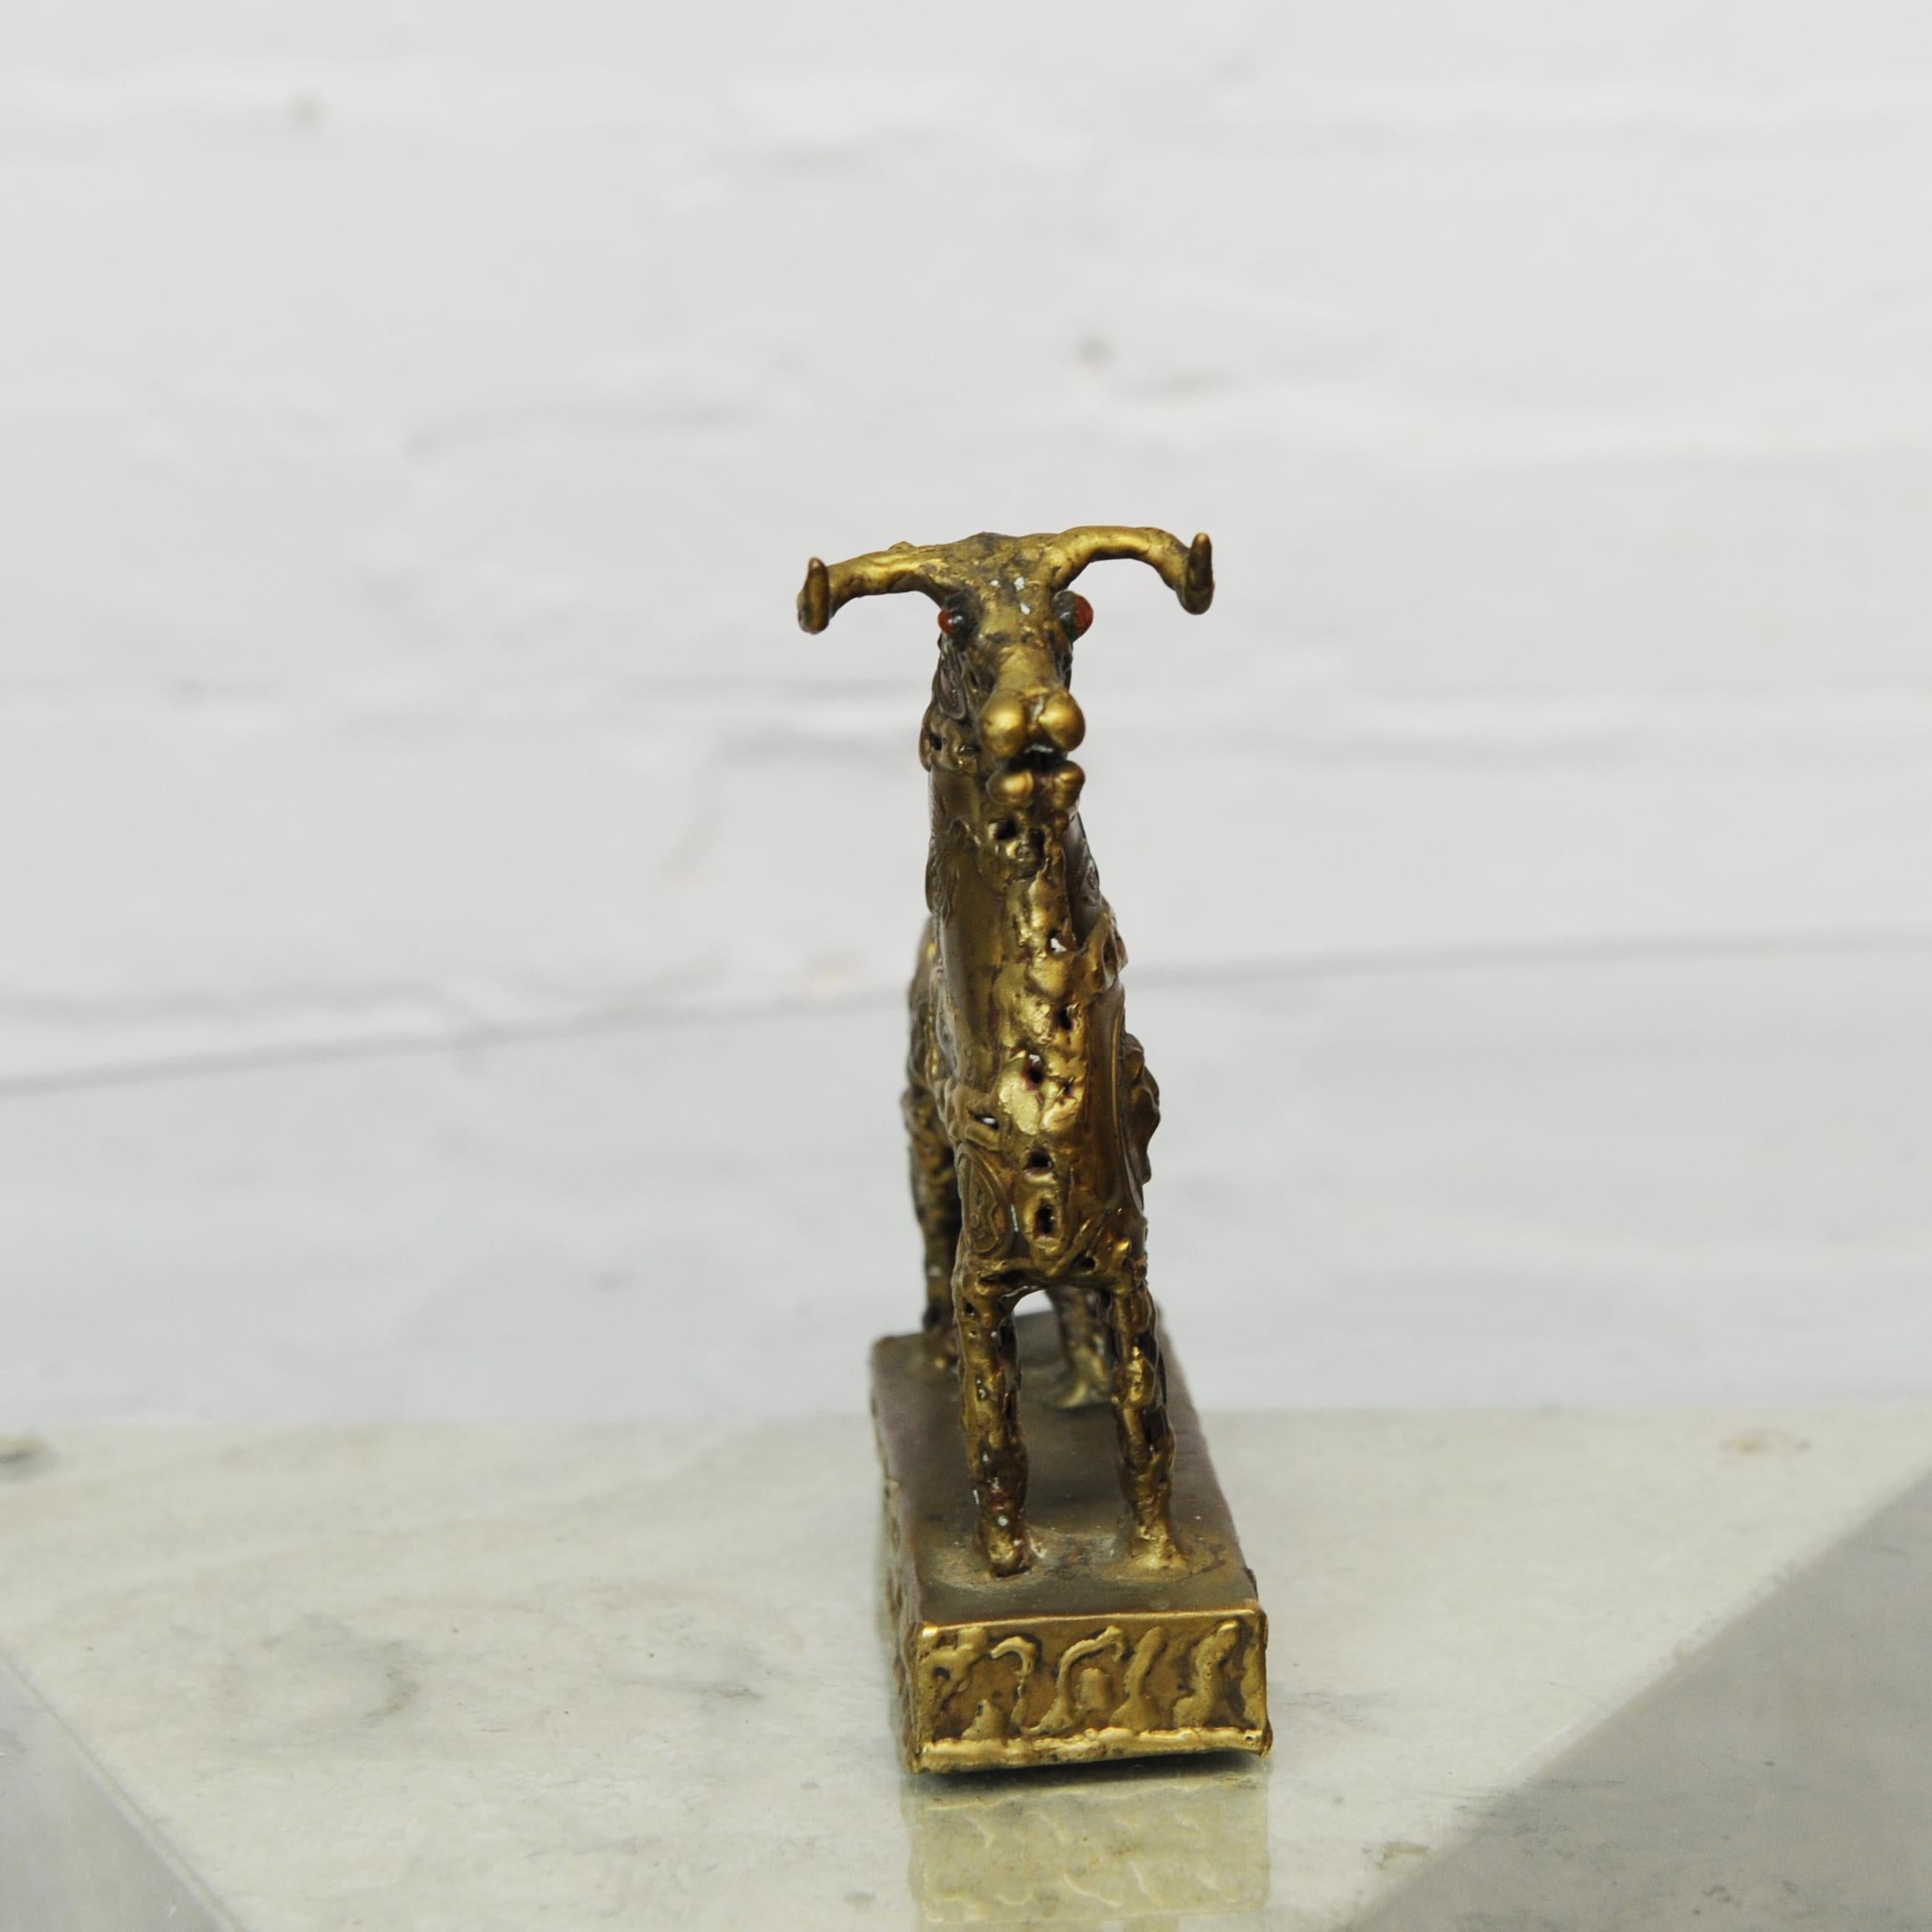 Late 20th Century Brutalist Metal Sculpture of a Brass Bull by Pal Kepenyes, 1970s For Sale